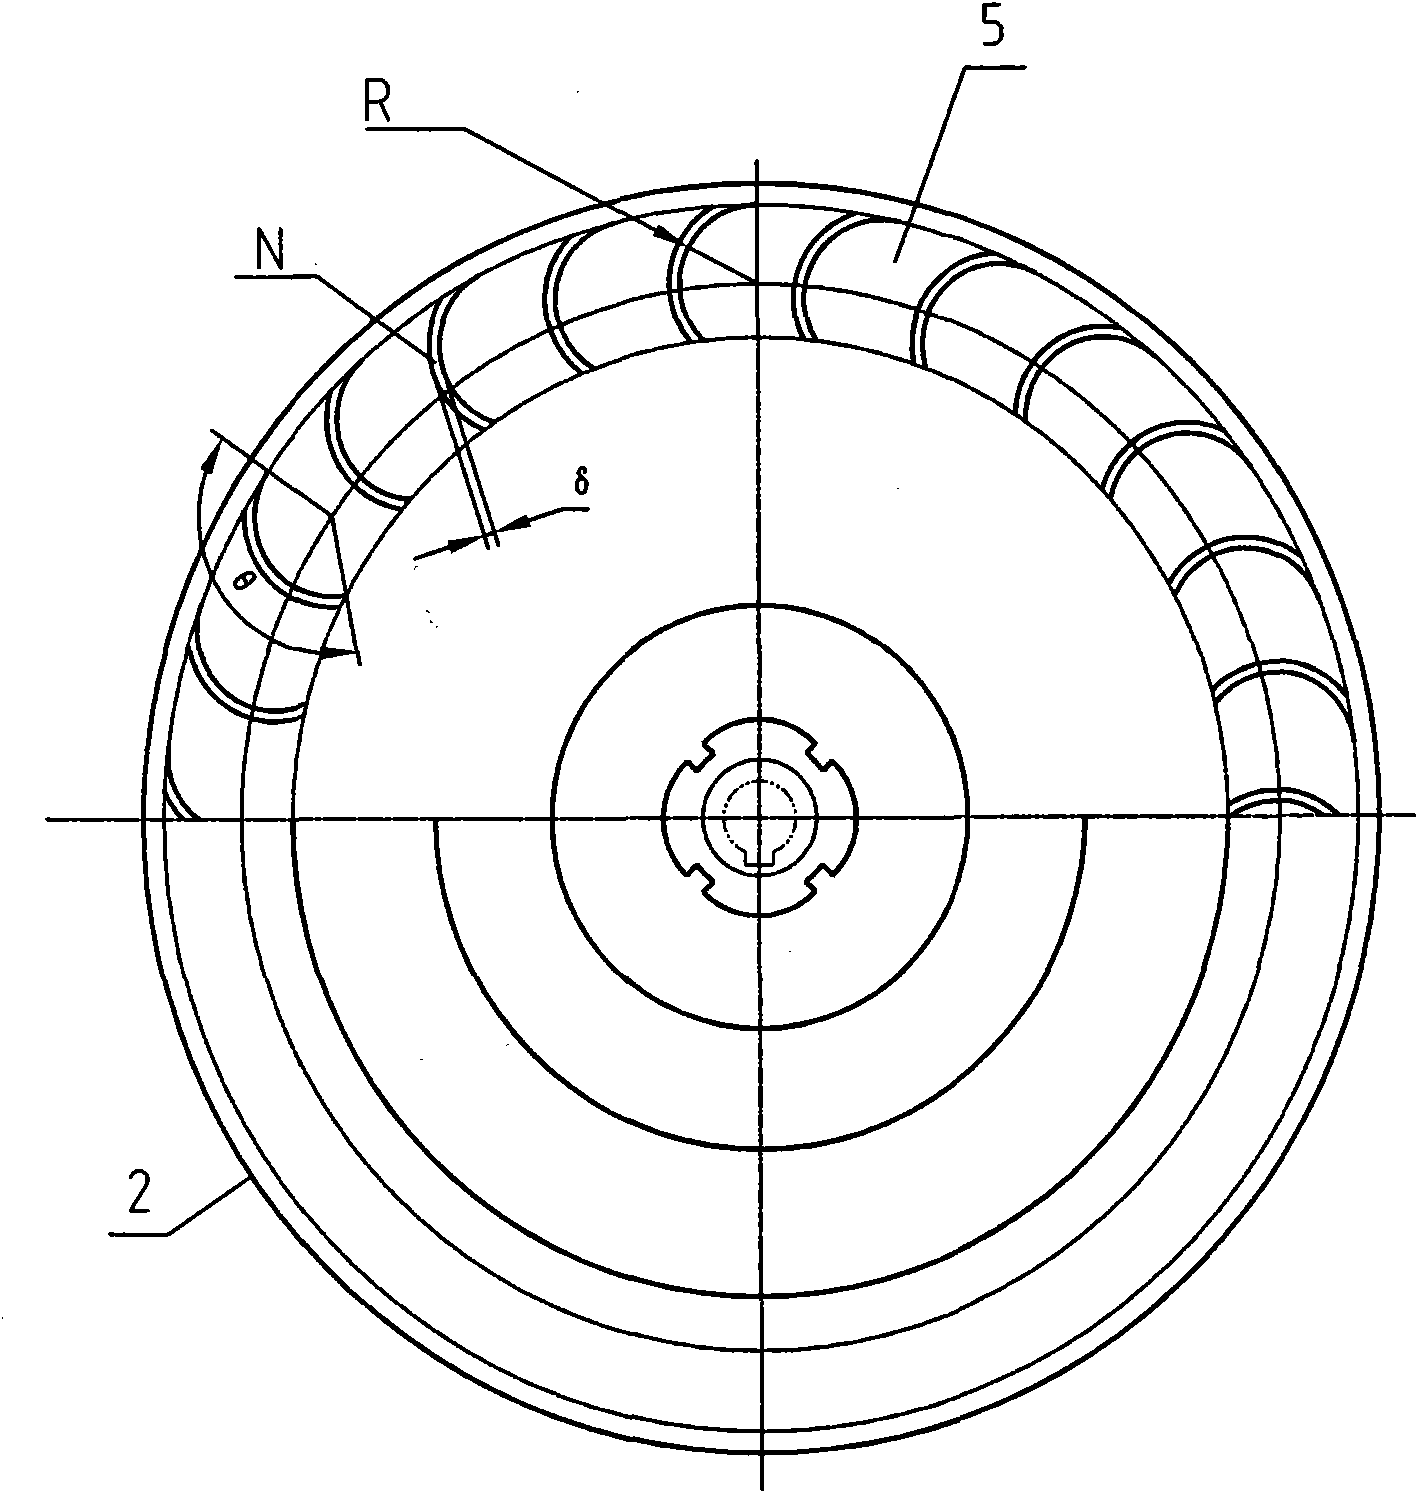 Forward skewed multi-blade impeller with narrow cavity and integral casting technique thereof